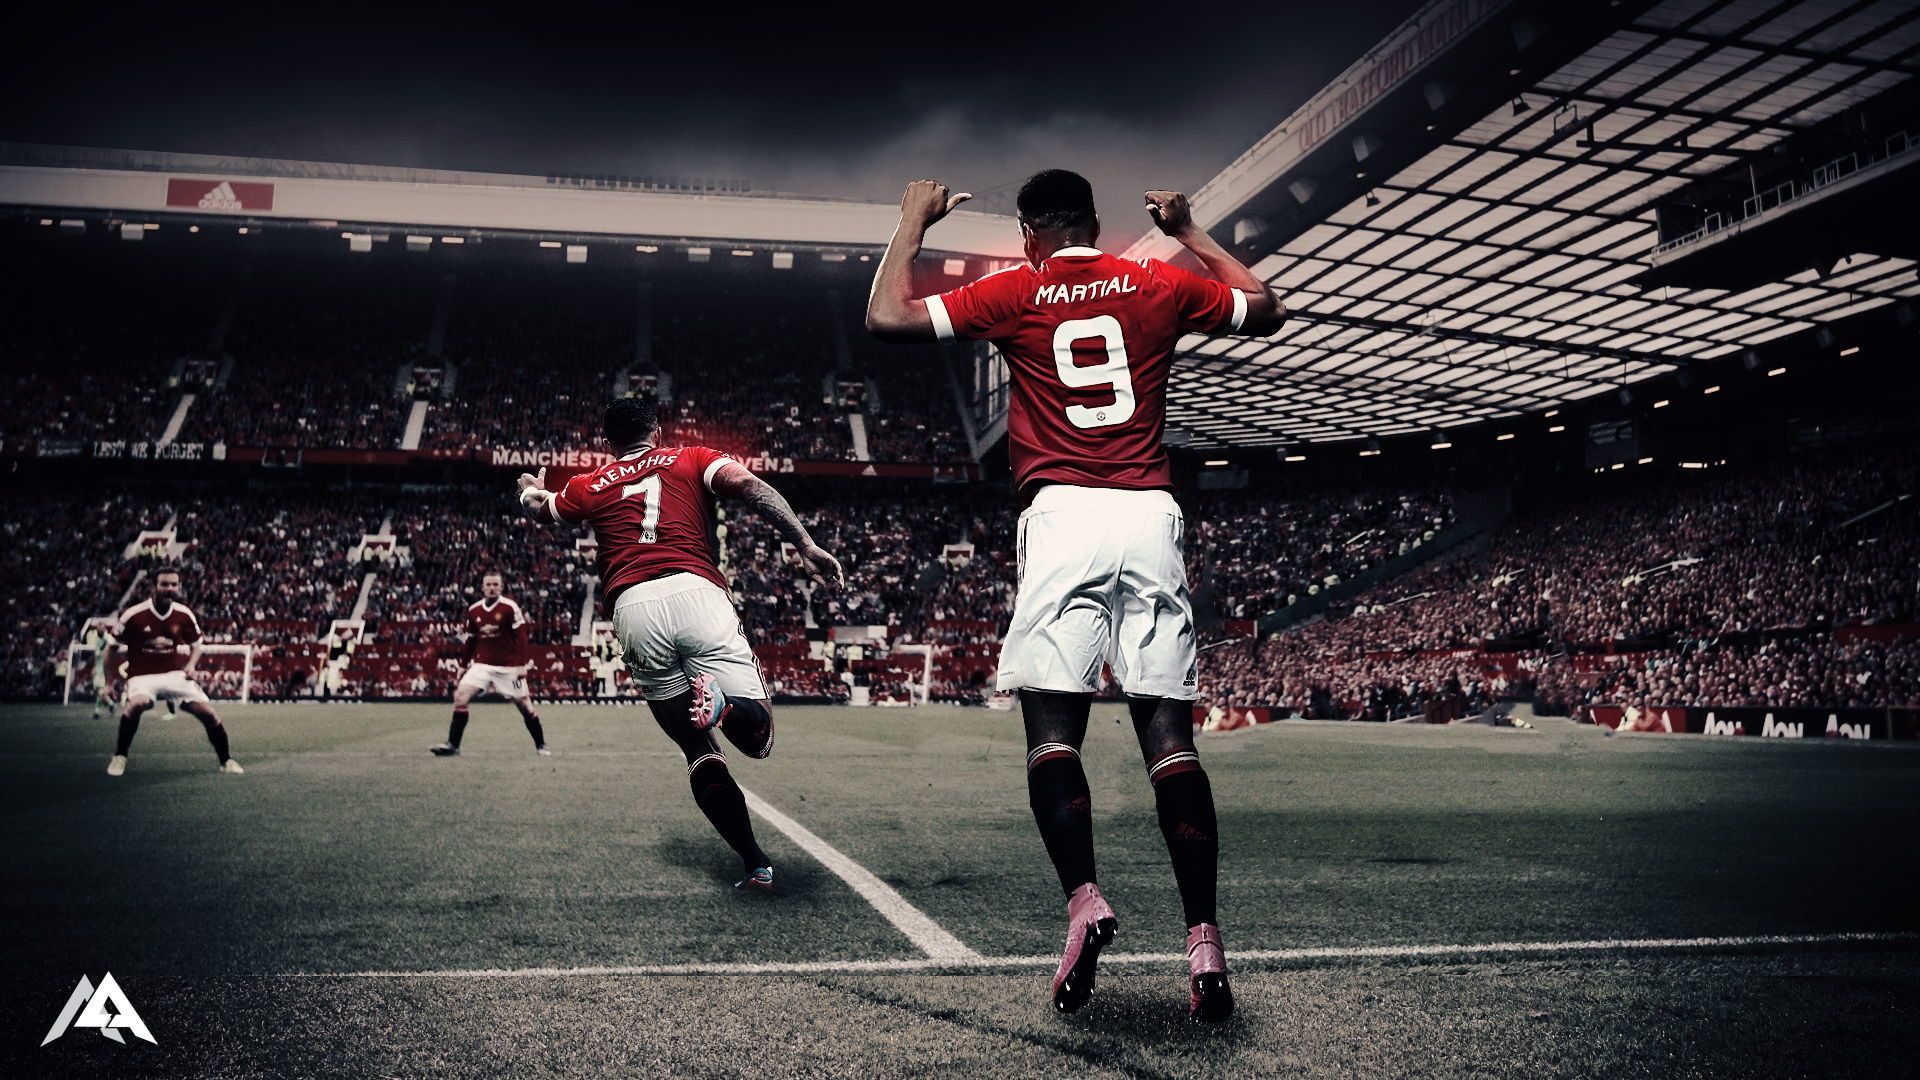 Man United's Old Trafford Stadium HD Wallpapers for PC [Free Download]